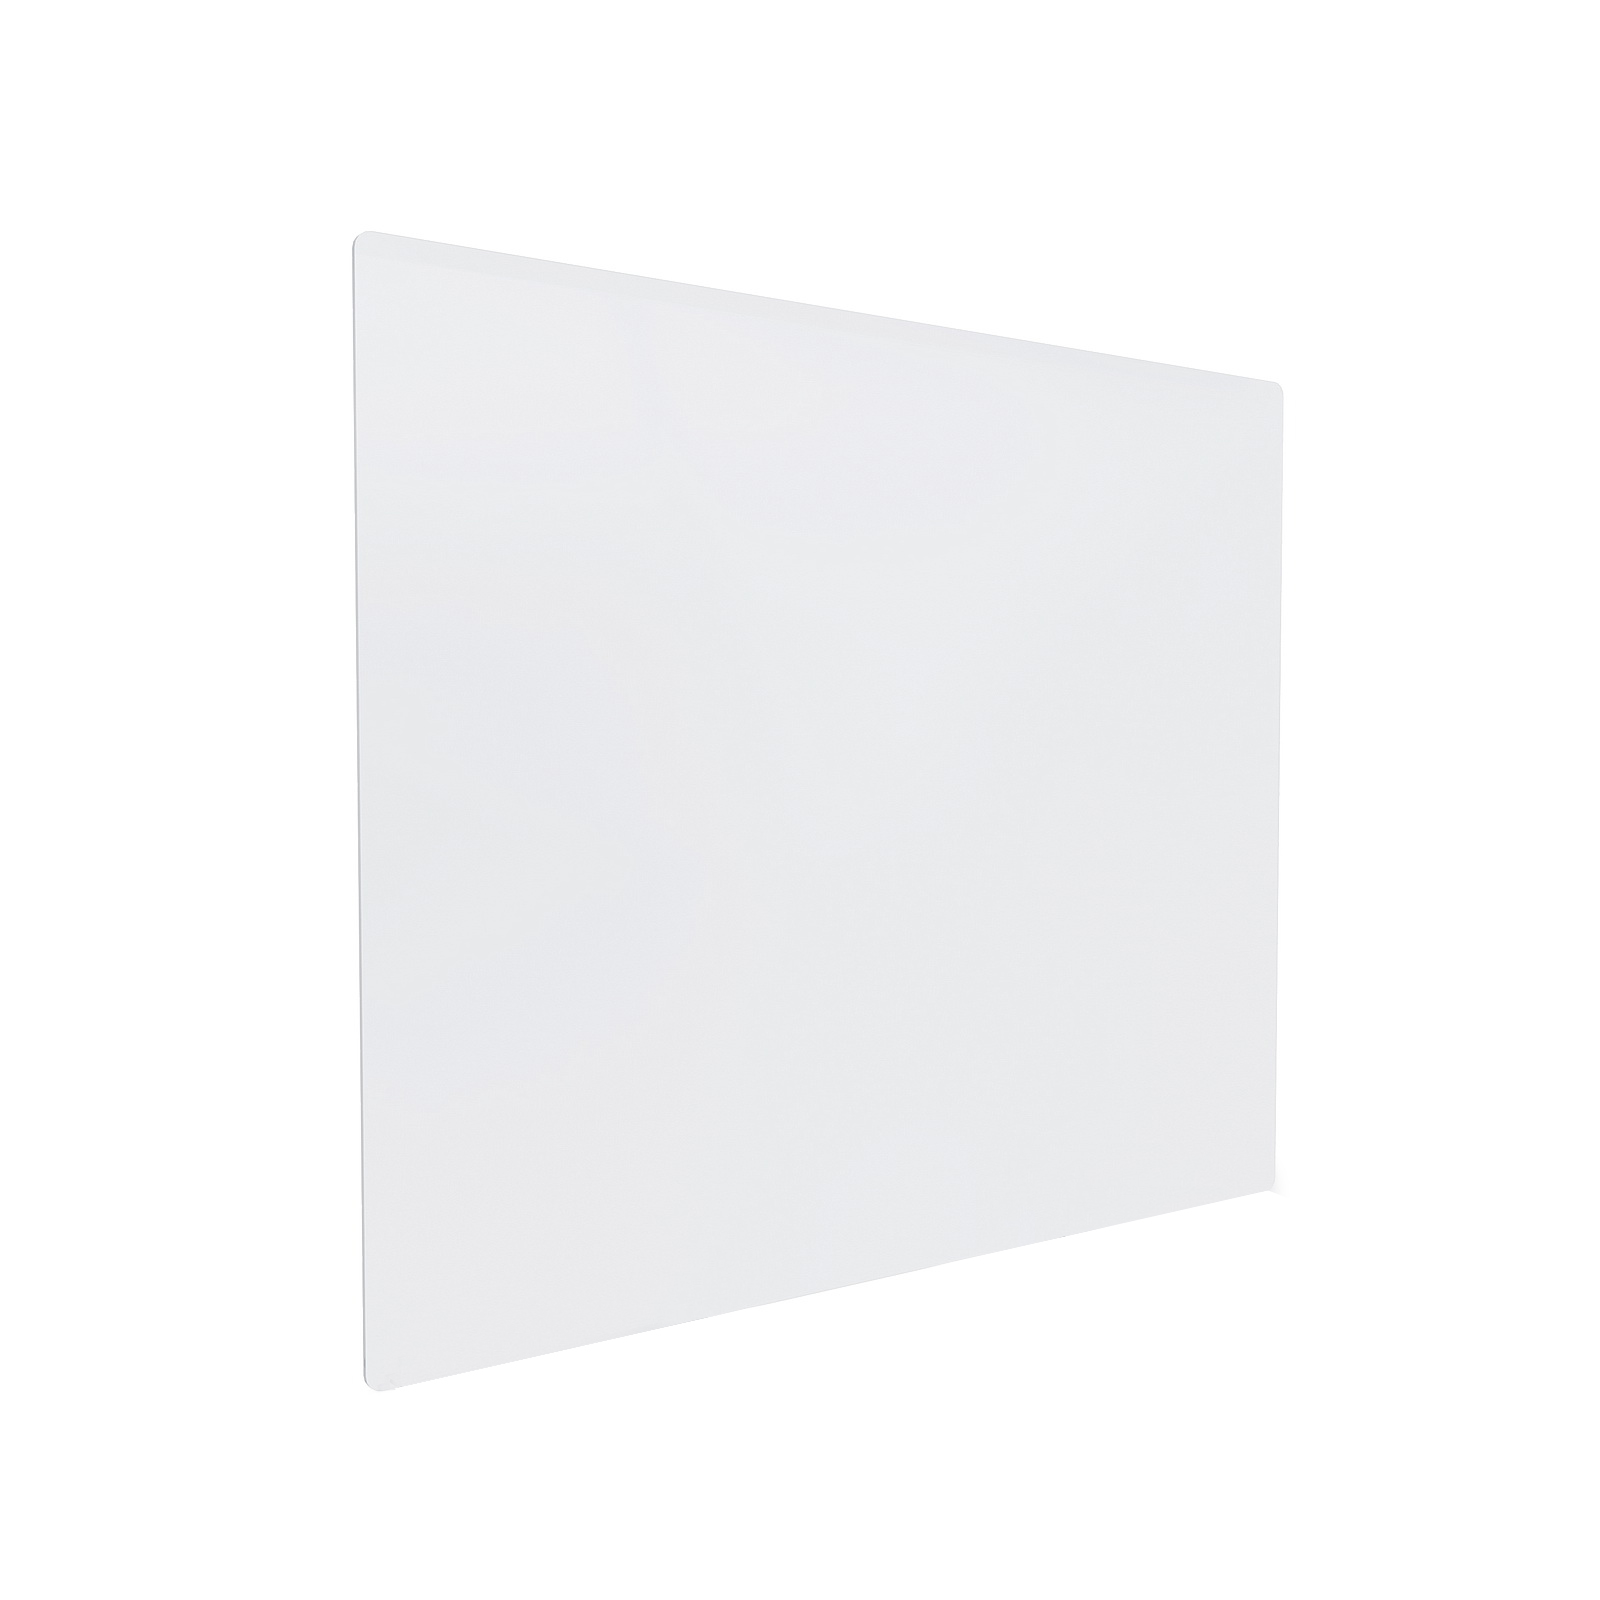 Clear Acrylic Sneeze Guard 30'' Wide x 36'' Tall x 0.157'' Thickness